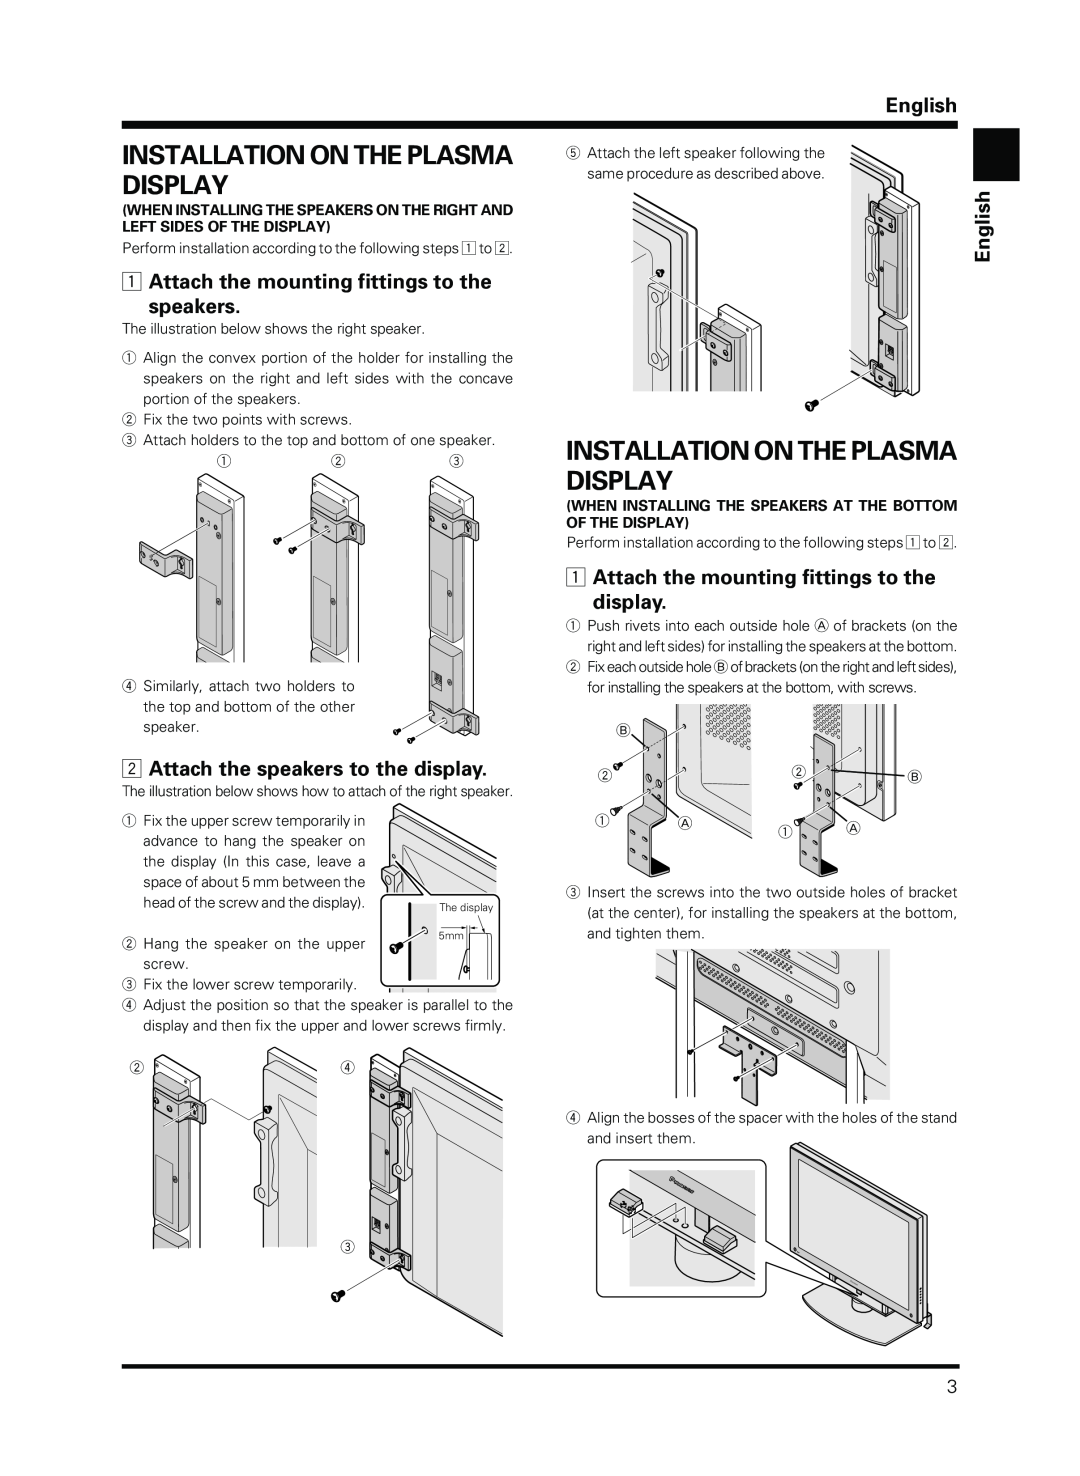 Pioneer PDP-S13-LR manual Installation On The Plasma Display, Attach the mounting fittings to the speakers, English 